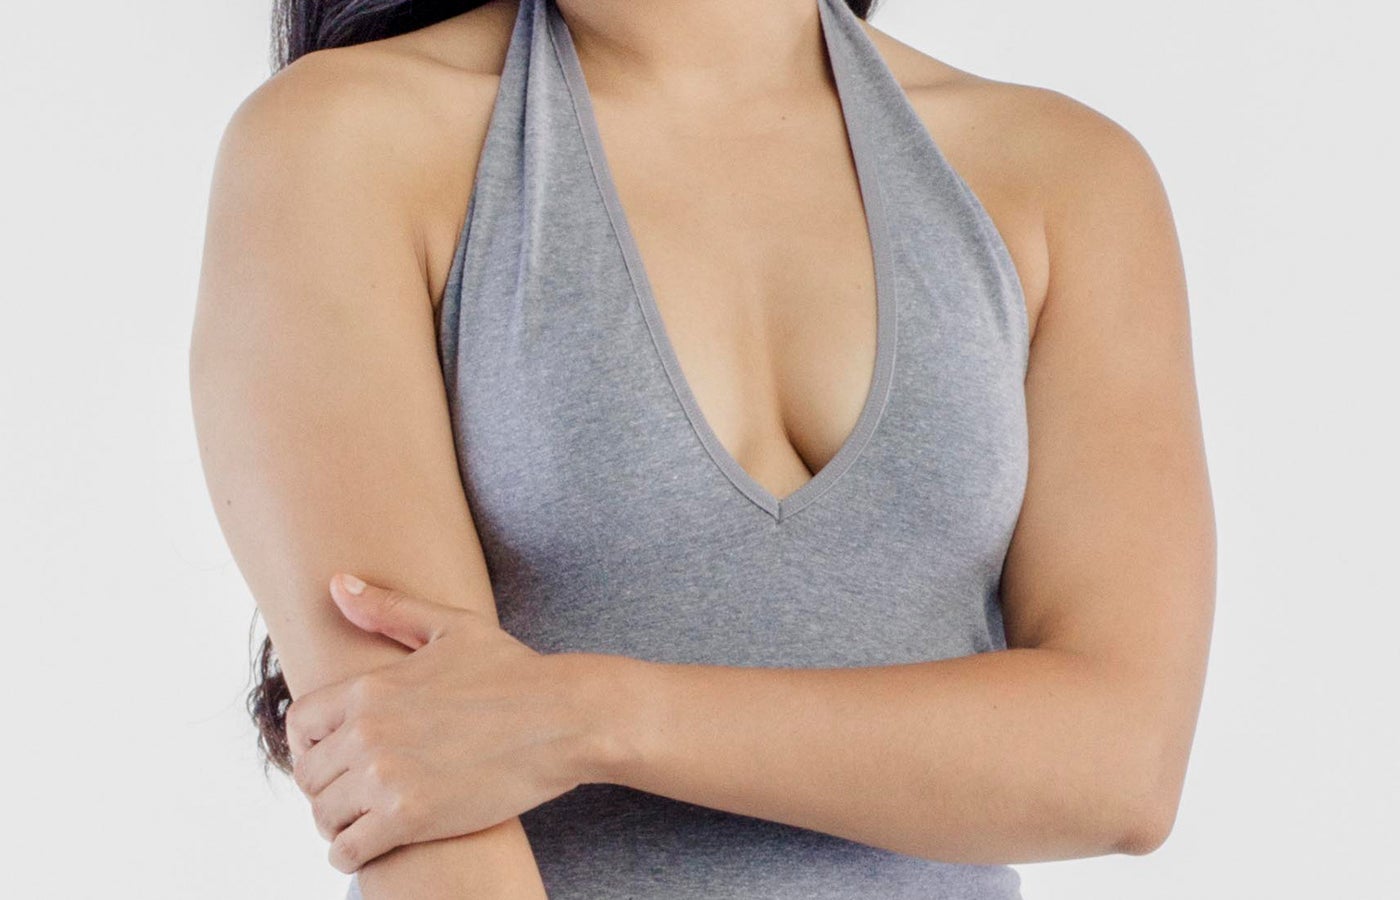 Taking a load off your shoulders: Breast Reduction